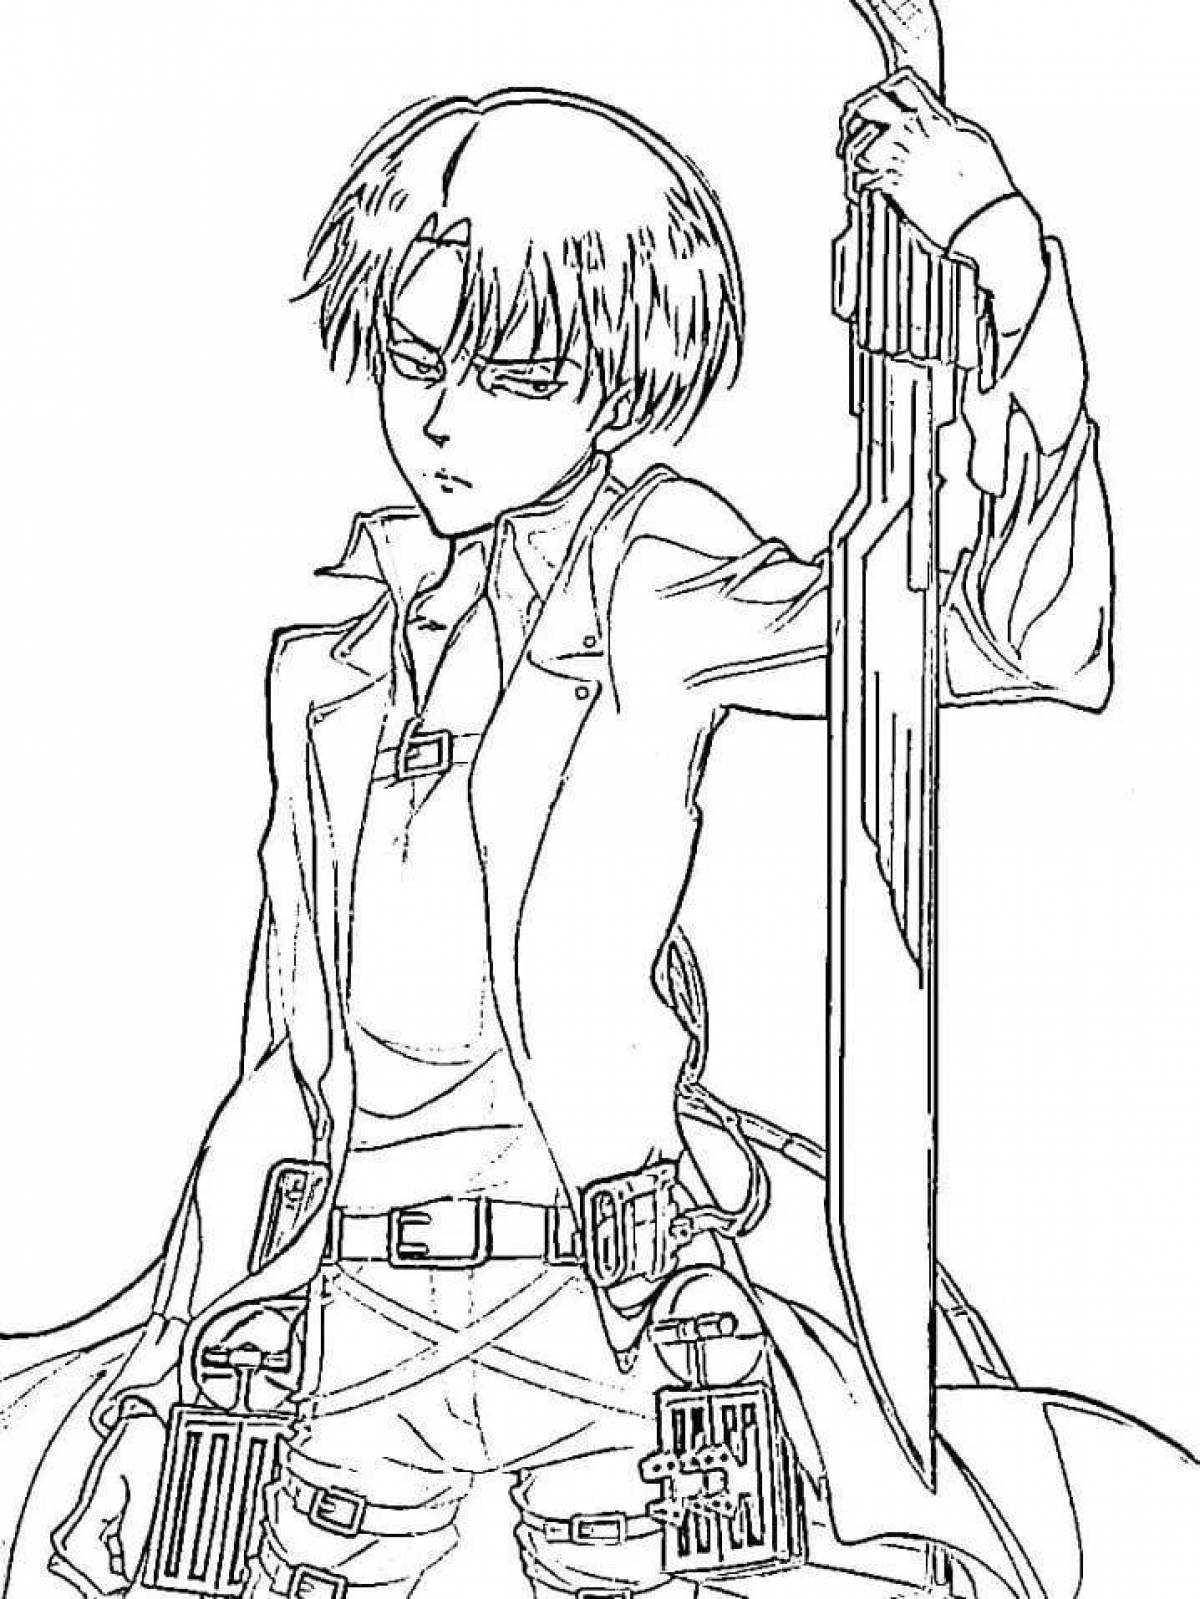 Colorful levi coloring page